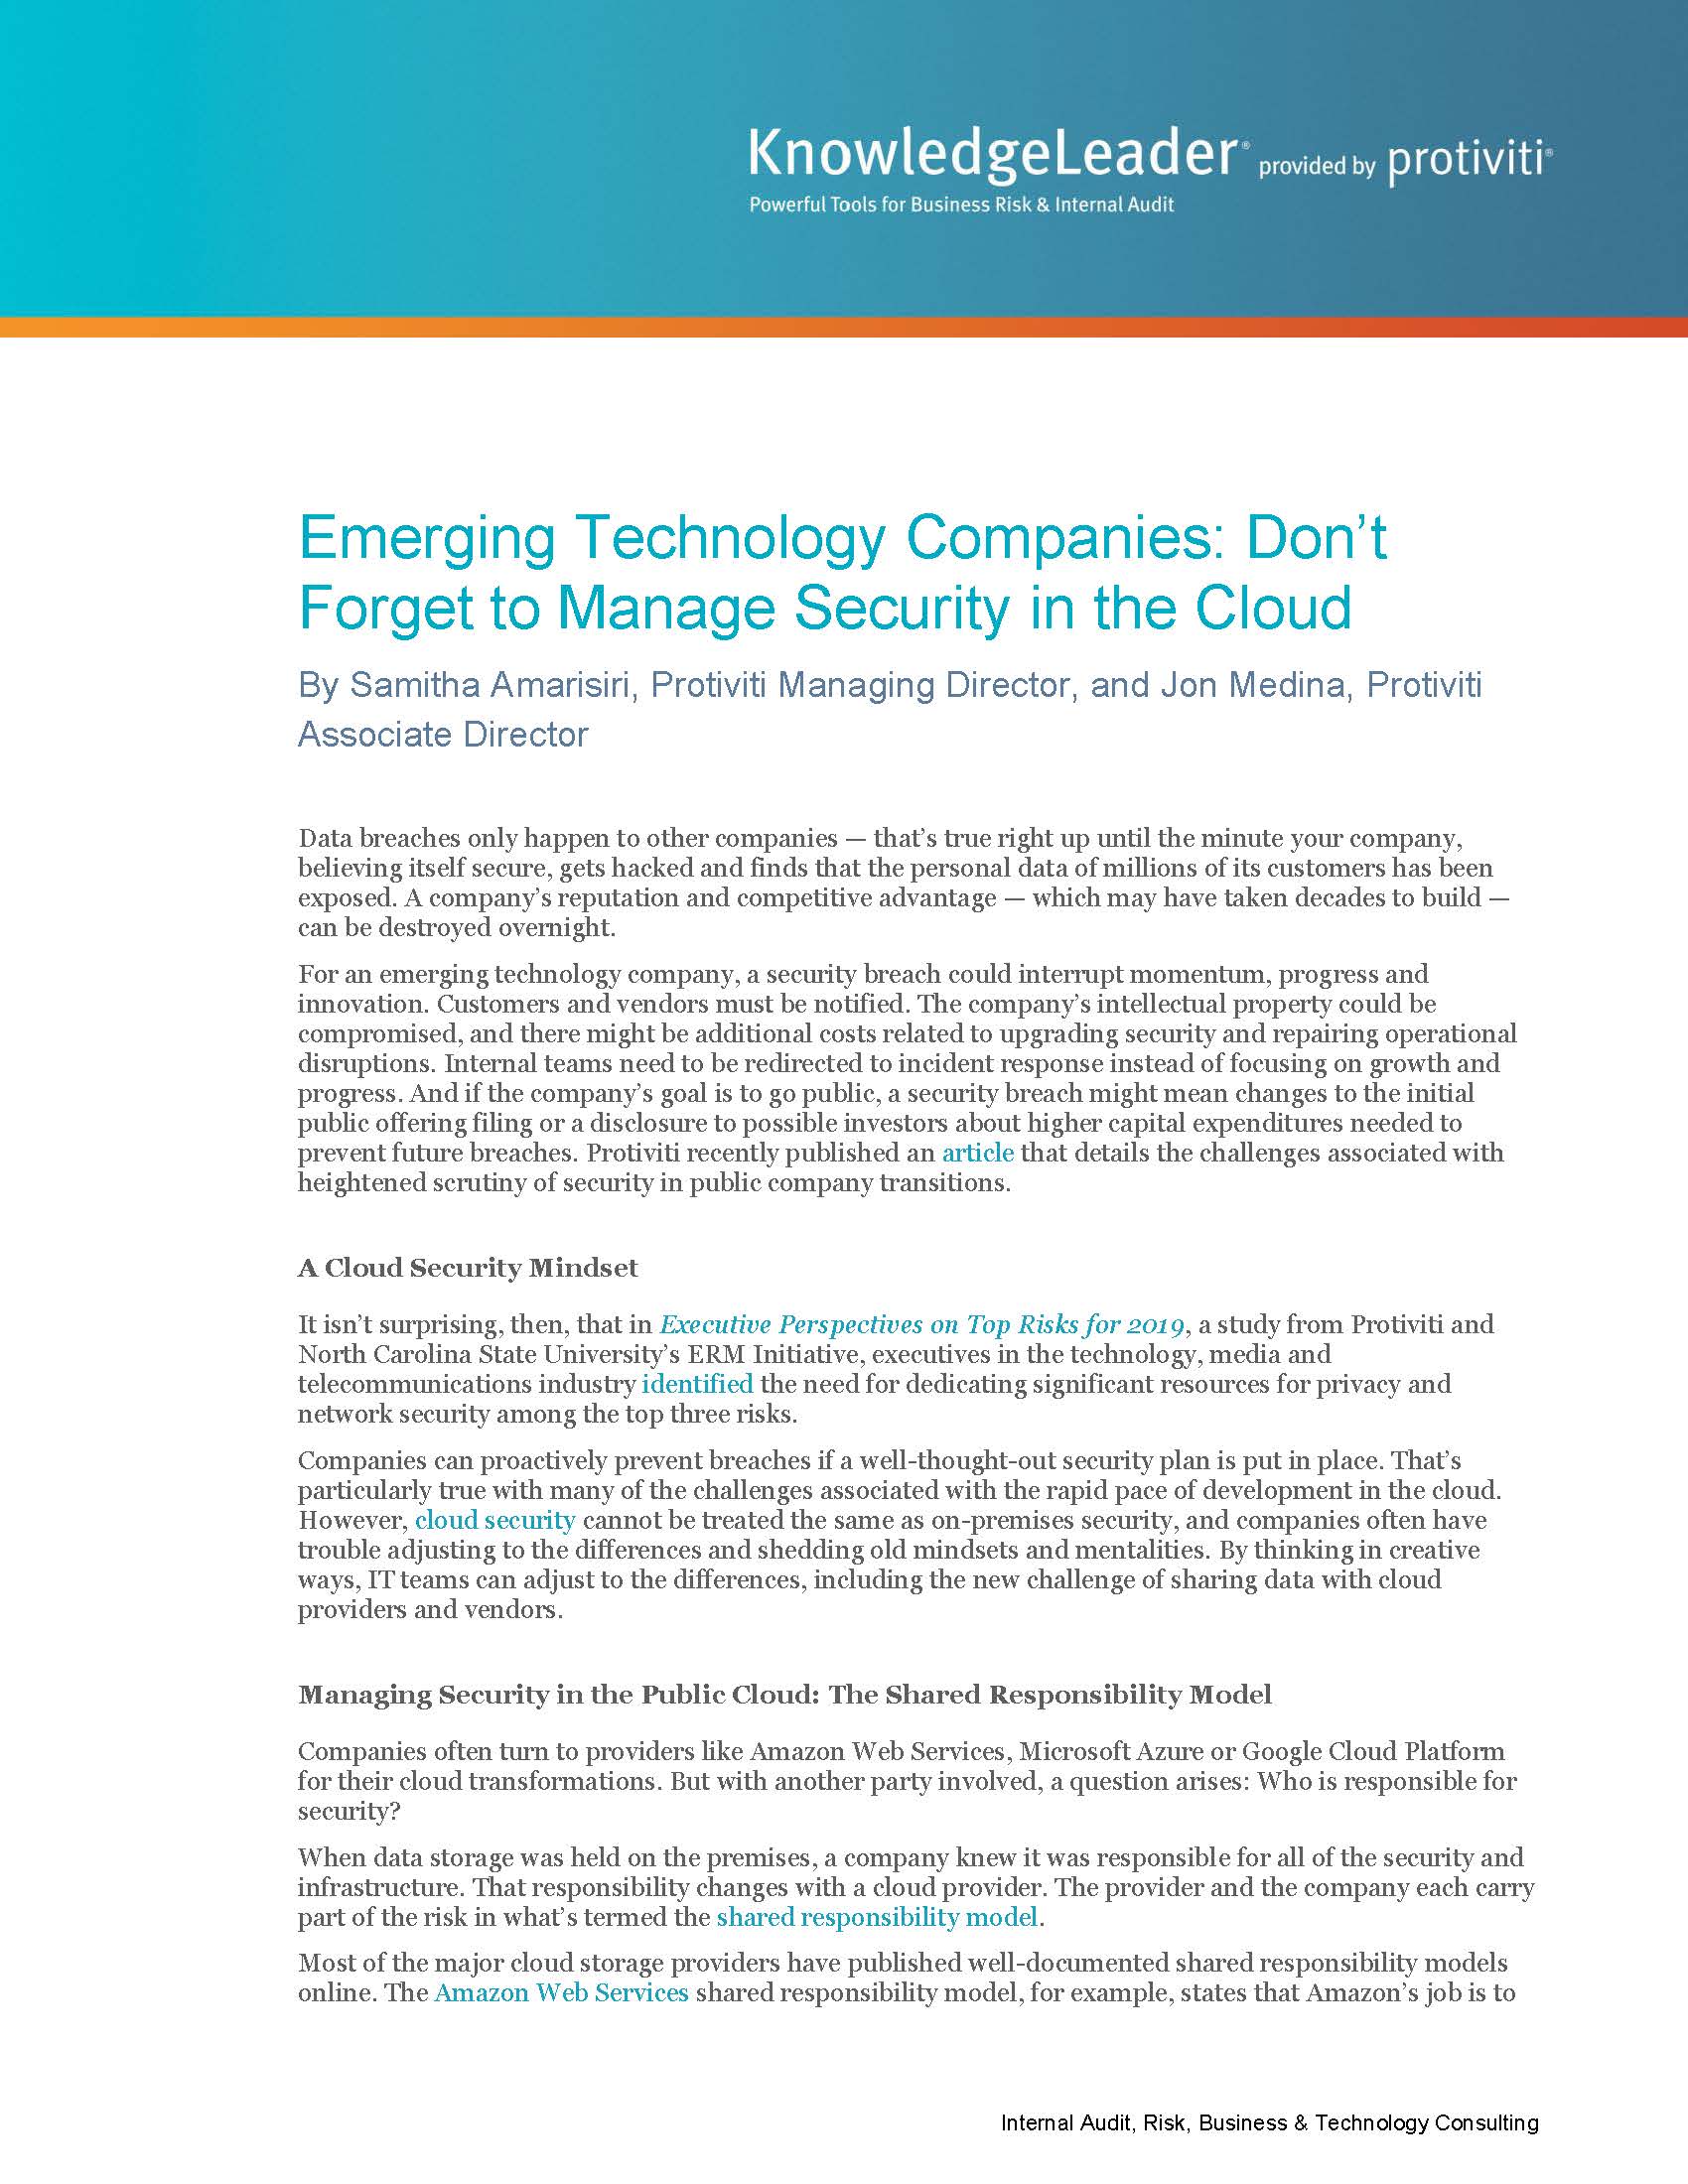 Screenshot of the first page of the Emerging Technology Companies Don’t Forget to Manage Security in the Cloud